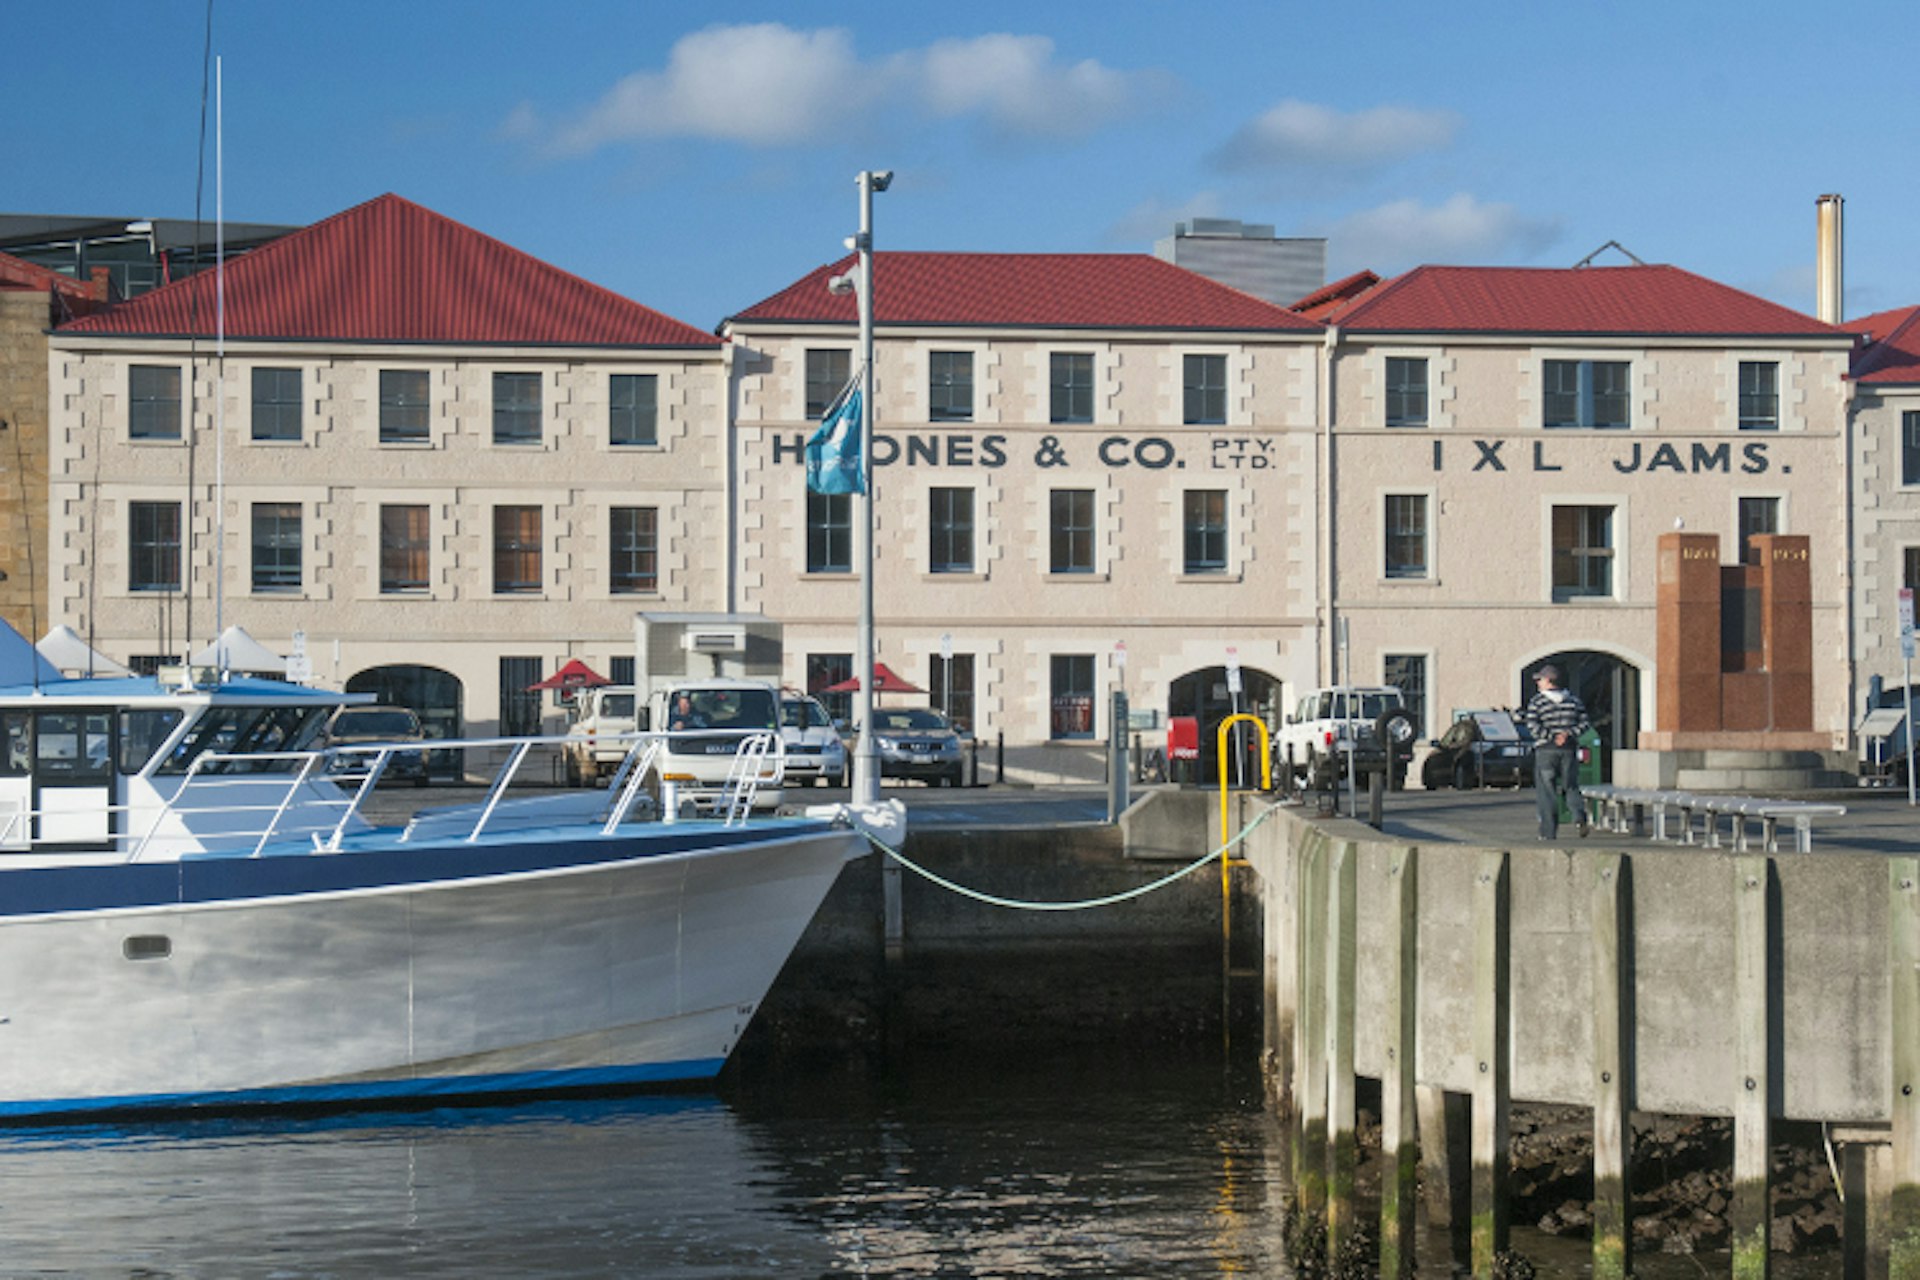 Colonial-era buildings on Hobart's waterfront / Image by Philip Game / Getty Images